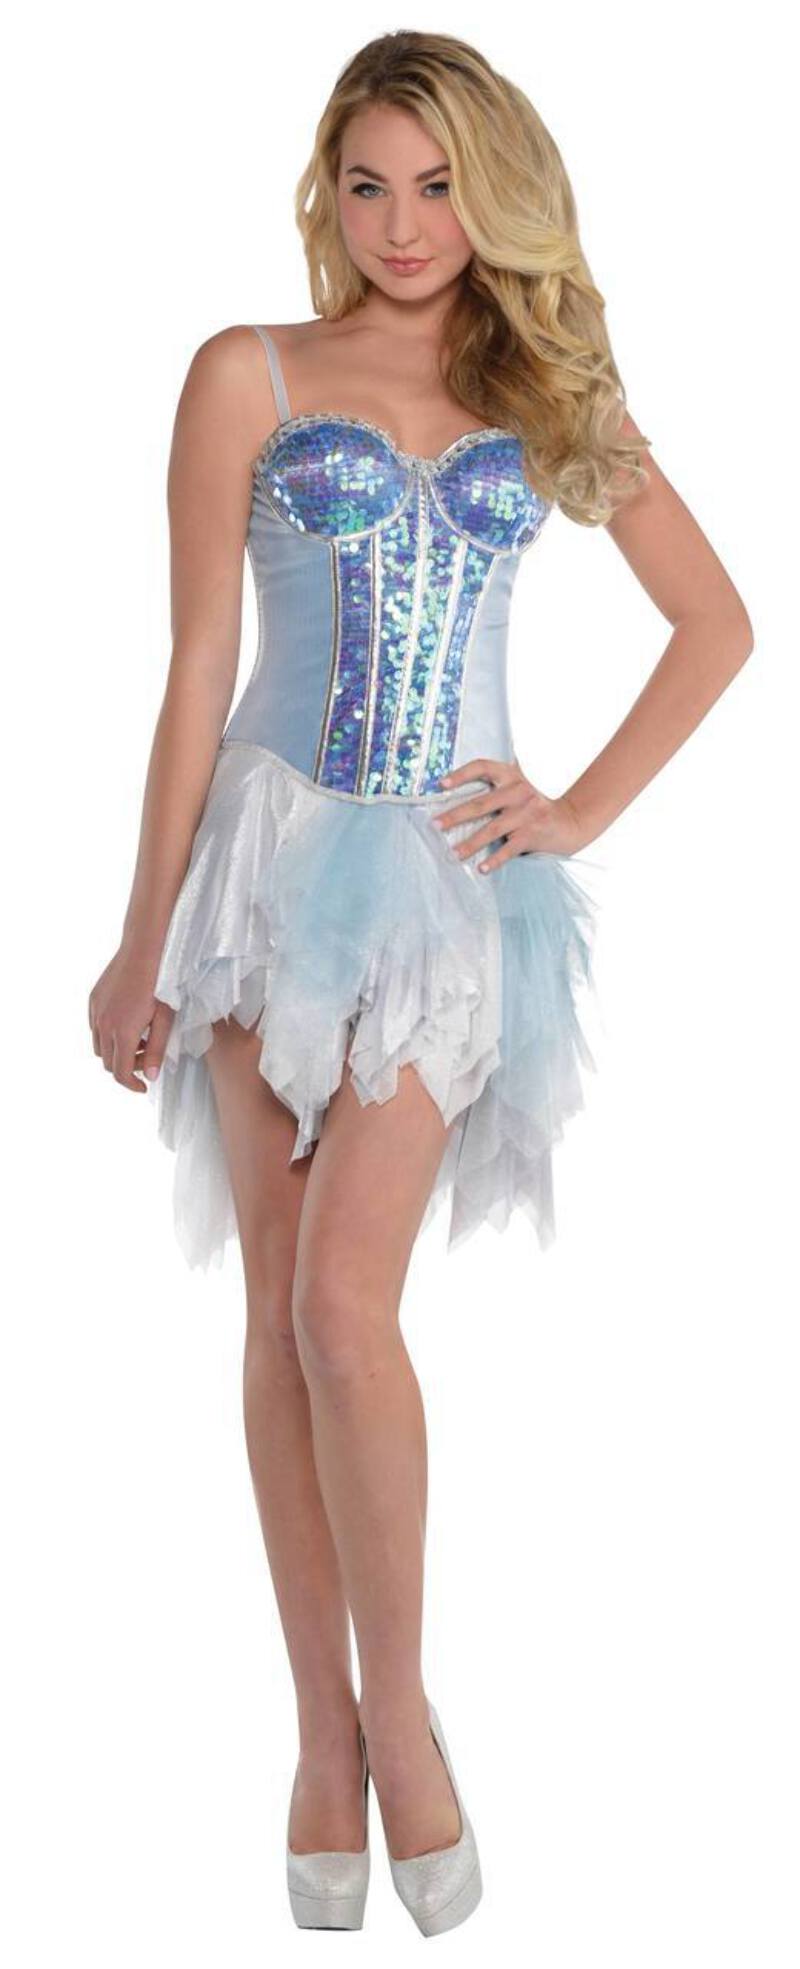 Amscan Glistening Deluxe Ice Fairytale Themed Corset Size S/M RRP 10.99 CLEARANCE XL 1.99